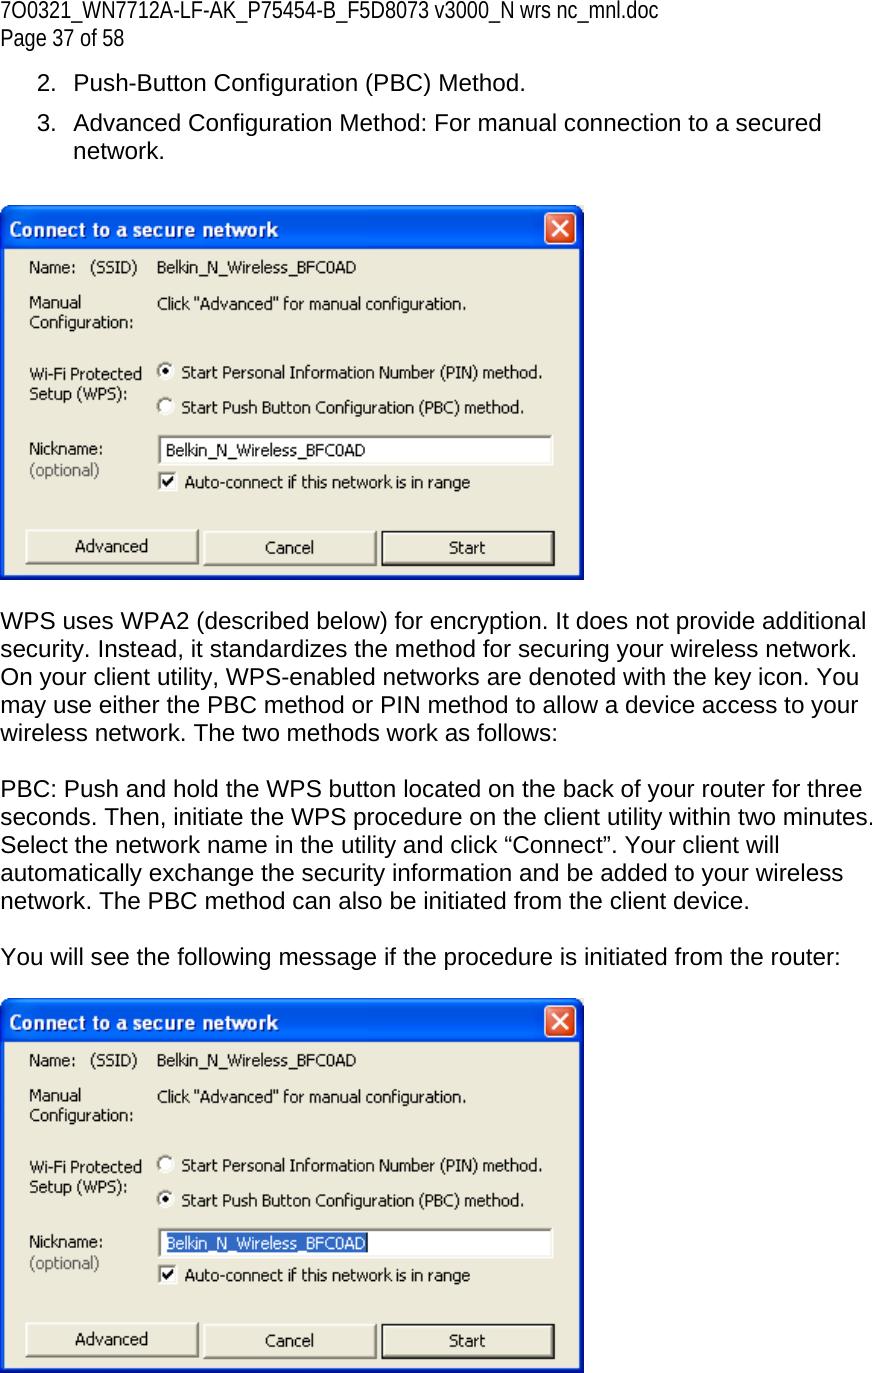 7O0321_WN7712A-LF-AK_P75454-B_F5D8073 v3000_N wrs nc_mnl.doc Page 37 of 58 2.  Push-Button Configuration (PBC) Method. 3.  Advanced Configuration Method: For manual connection to a secured network.     WPS uses WPA2 (described below) for encryption. It does not provide additional security. Instead, it standardizes the method for securing your wireless network. On your client utility, WPS-enabled networks are denoted with the key icon. You may use either the PBC method or PIN method to allow a device access to your wireless network. The two methods work as follows:  PBC: Push and hold the WPS button located on the back of your router for three seconds. Then, initiate the WPS procedure on the client utility within two minutes. Select the network name in the utility and click “Connect”. Your client will automatically exchange the security information and be added to your wireless network. The PBC method can also be initiated from the client device.  You will see the following message if the procedure is initiated from the router:   